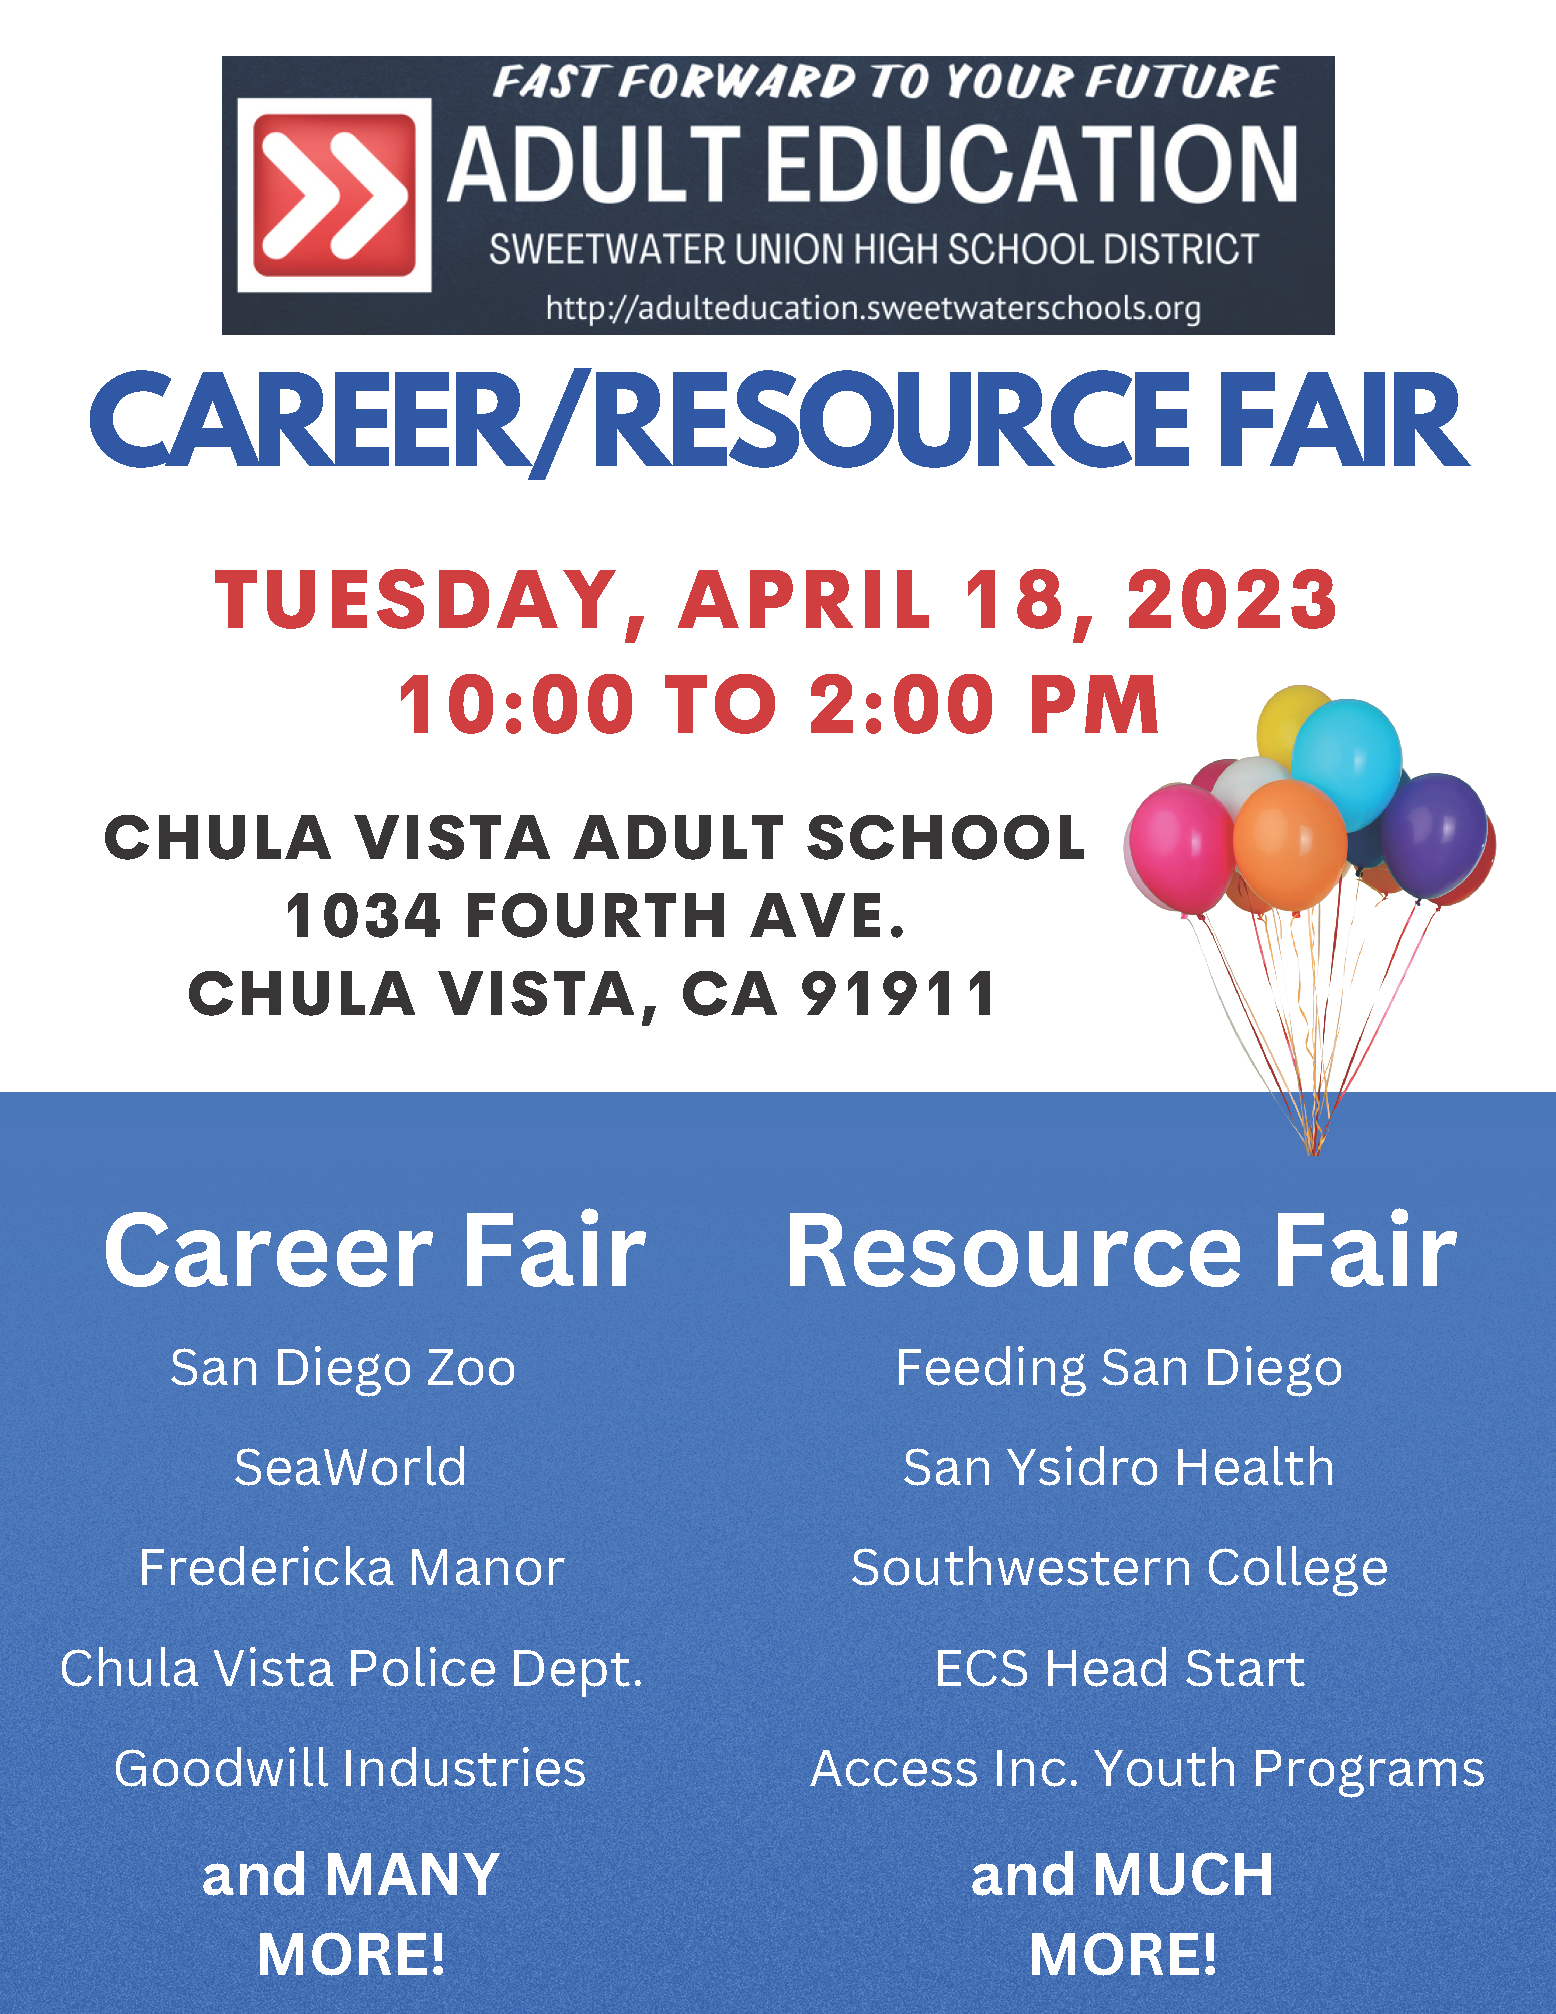 Adult Education Career and Resource Fair flyer